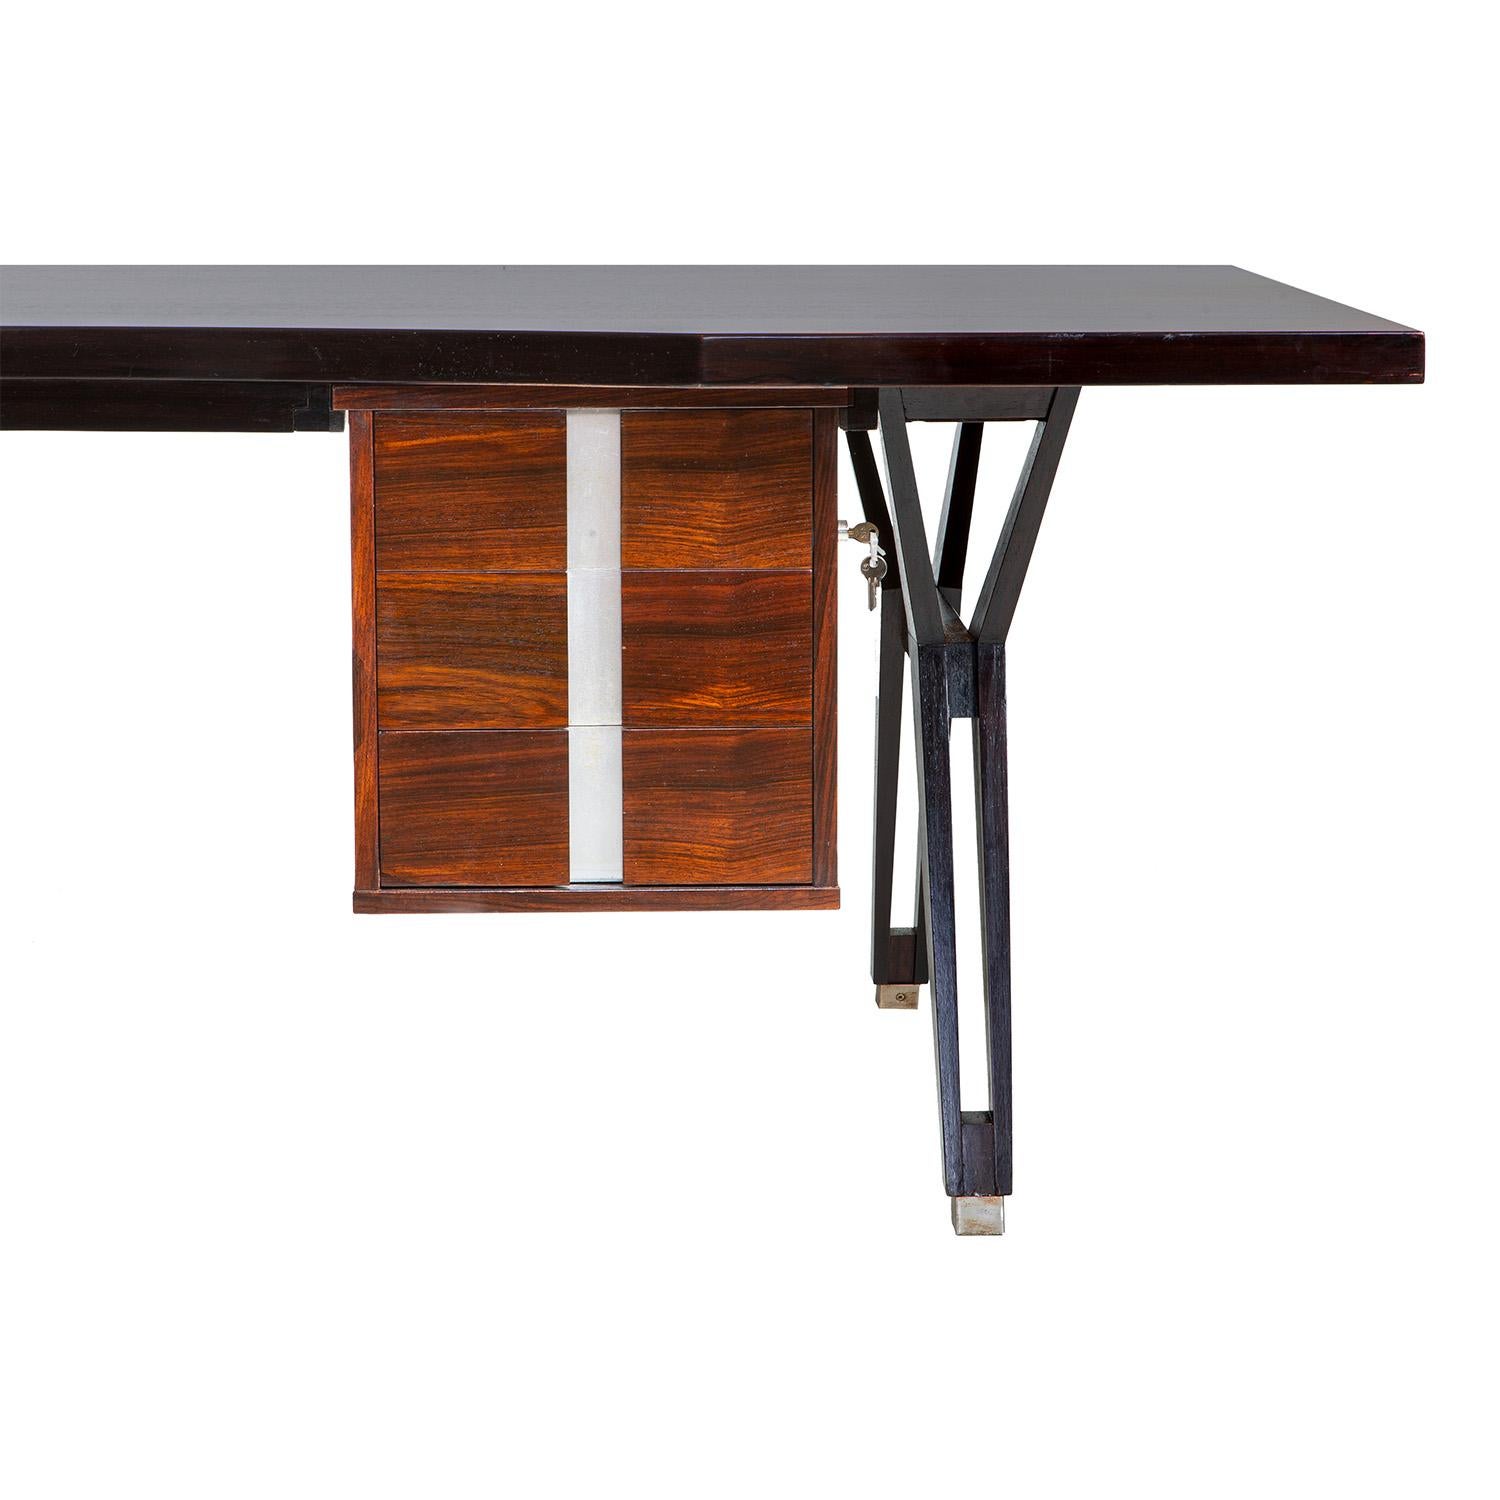 Mid-Century Modern 20th Century Italian Rosewood MIM Writing Table - Vintage Desk by Ico Parisi For Sale